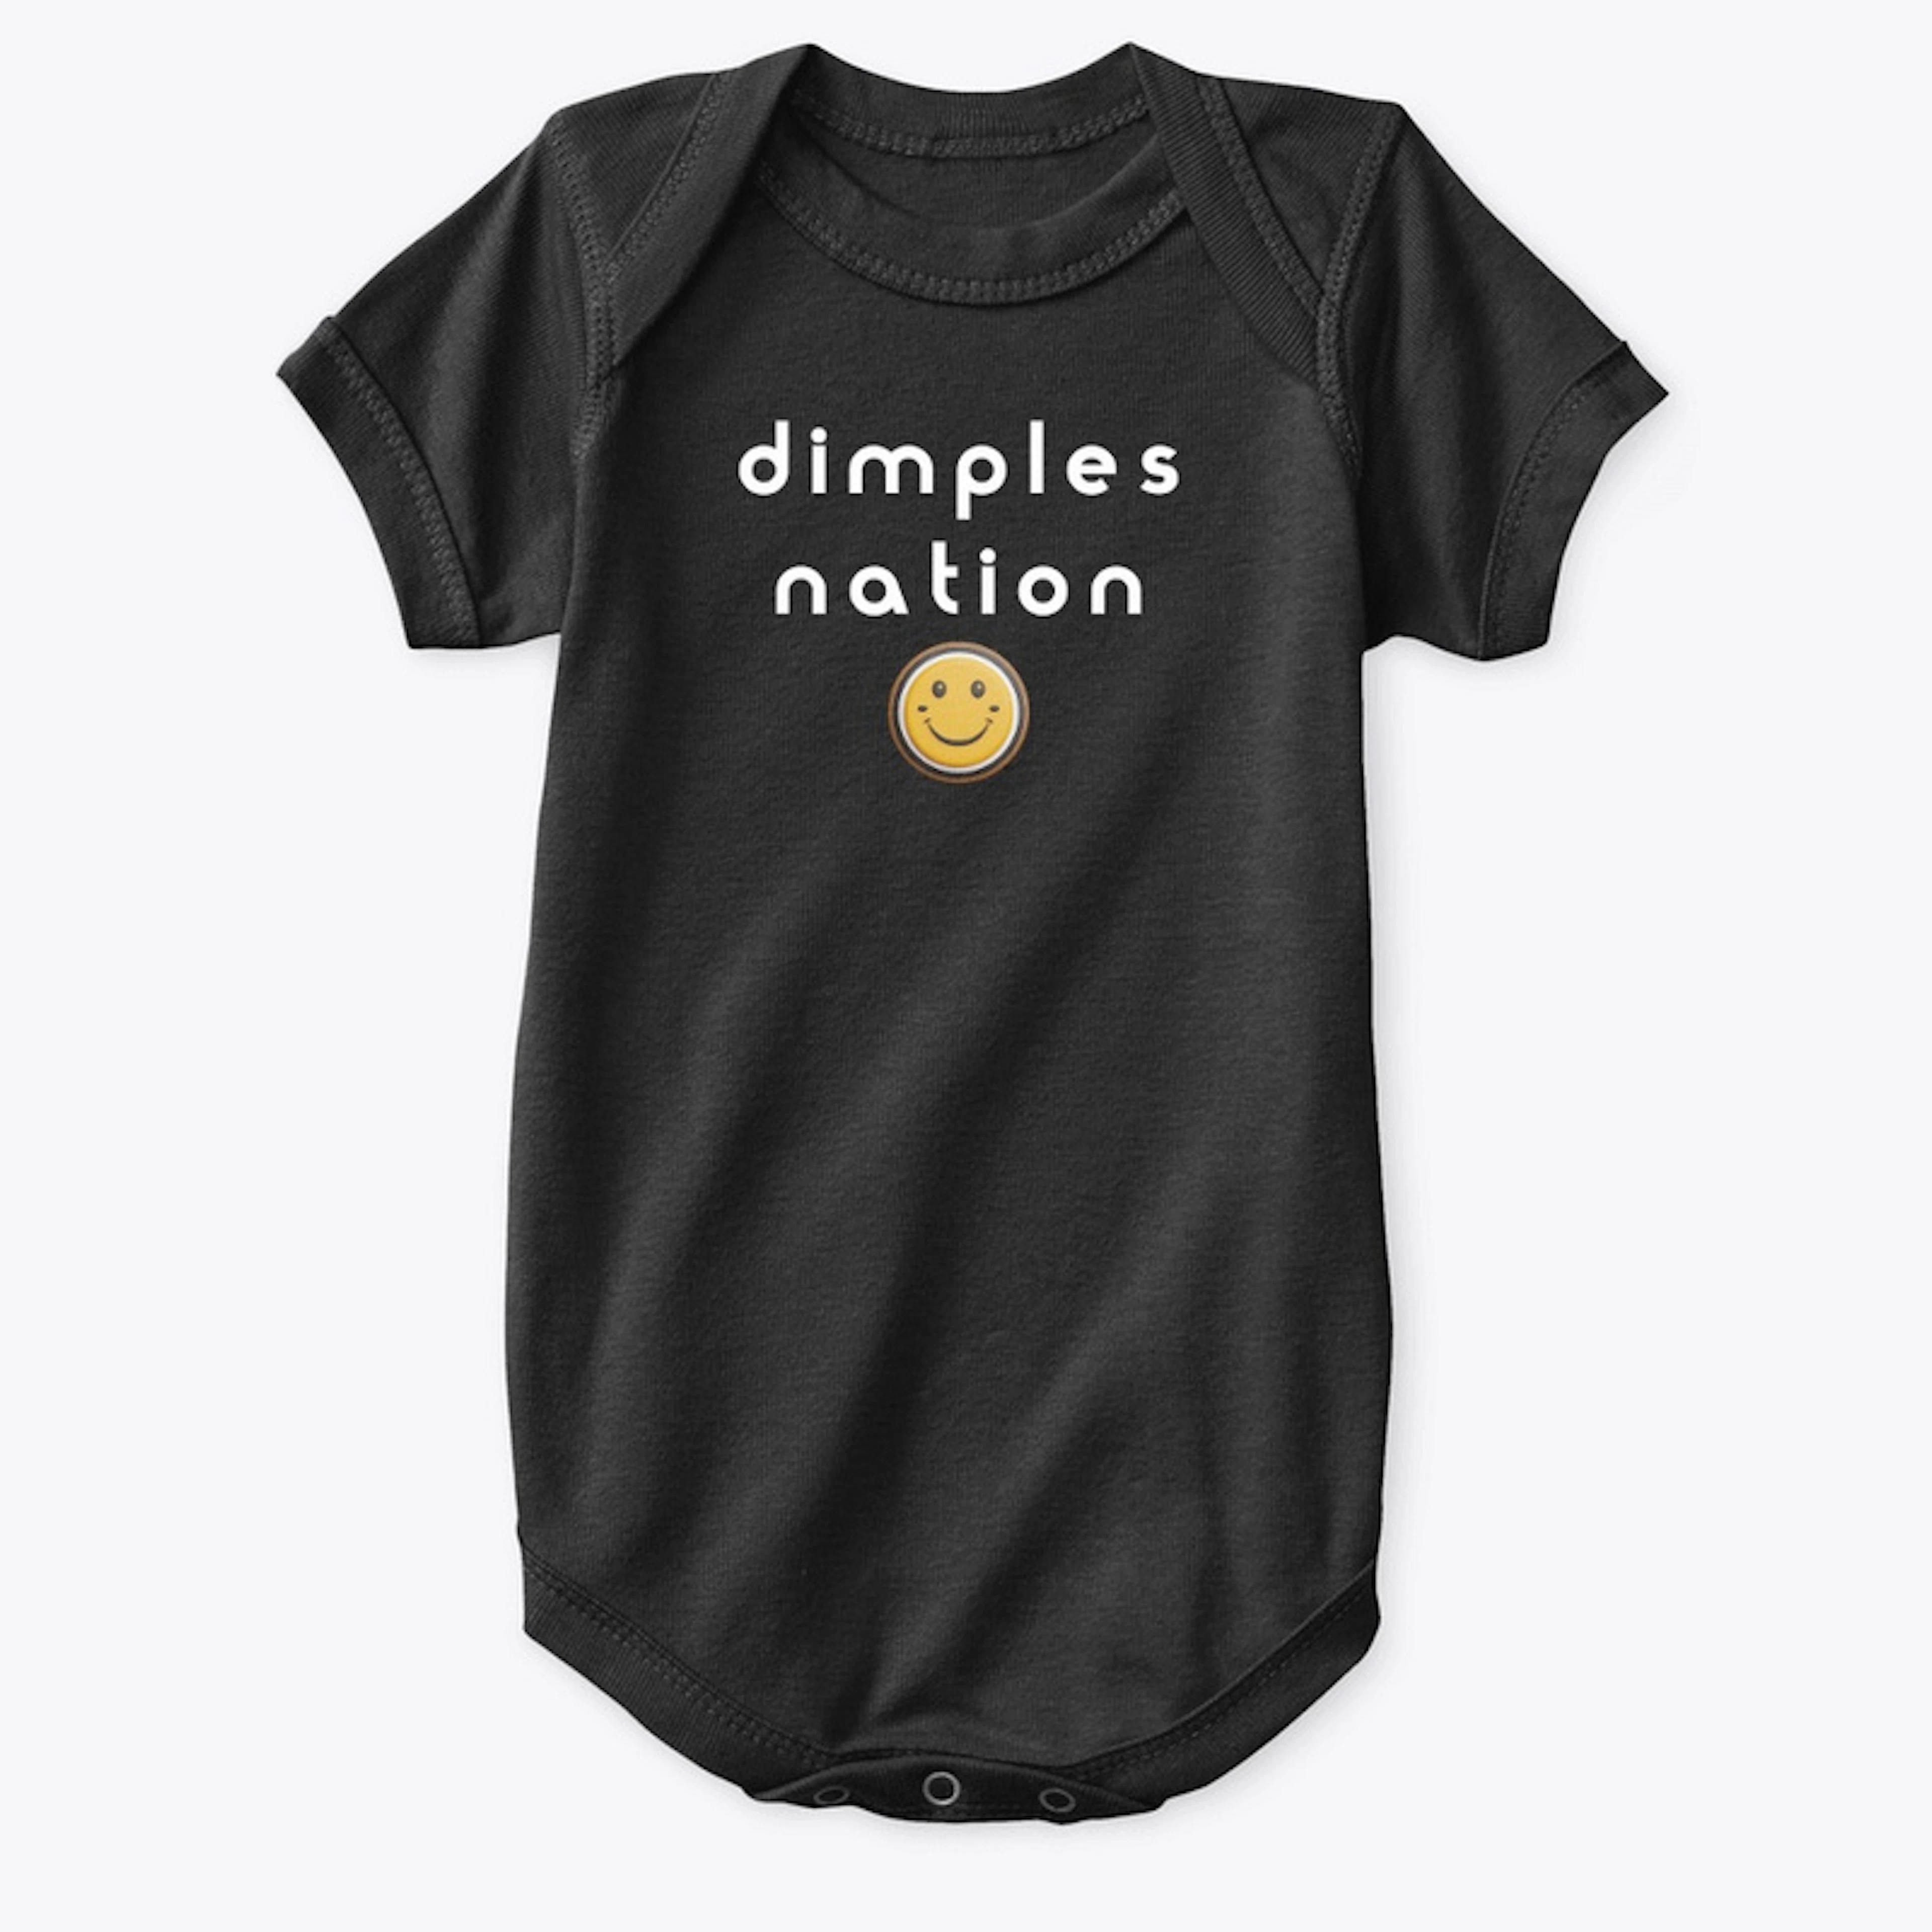 Dimples Nation